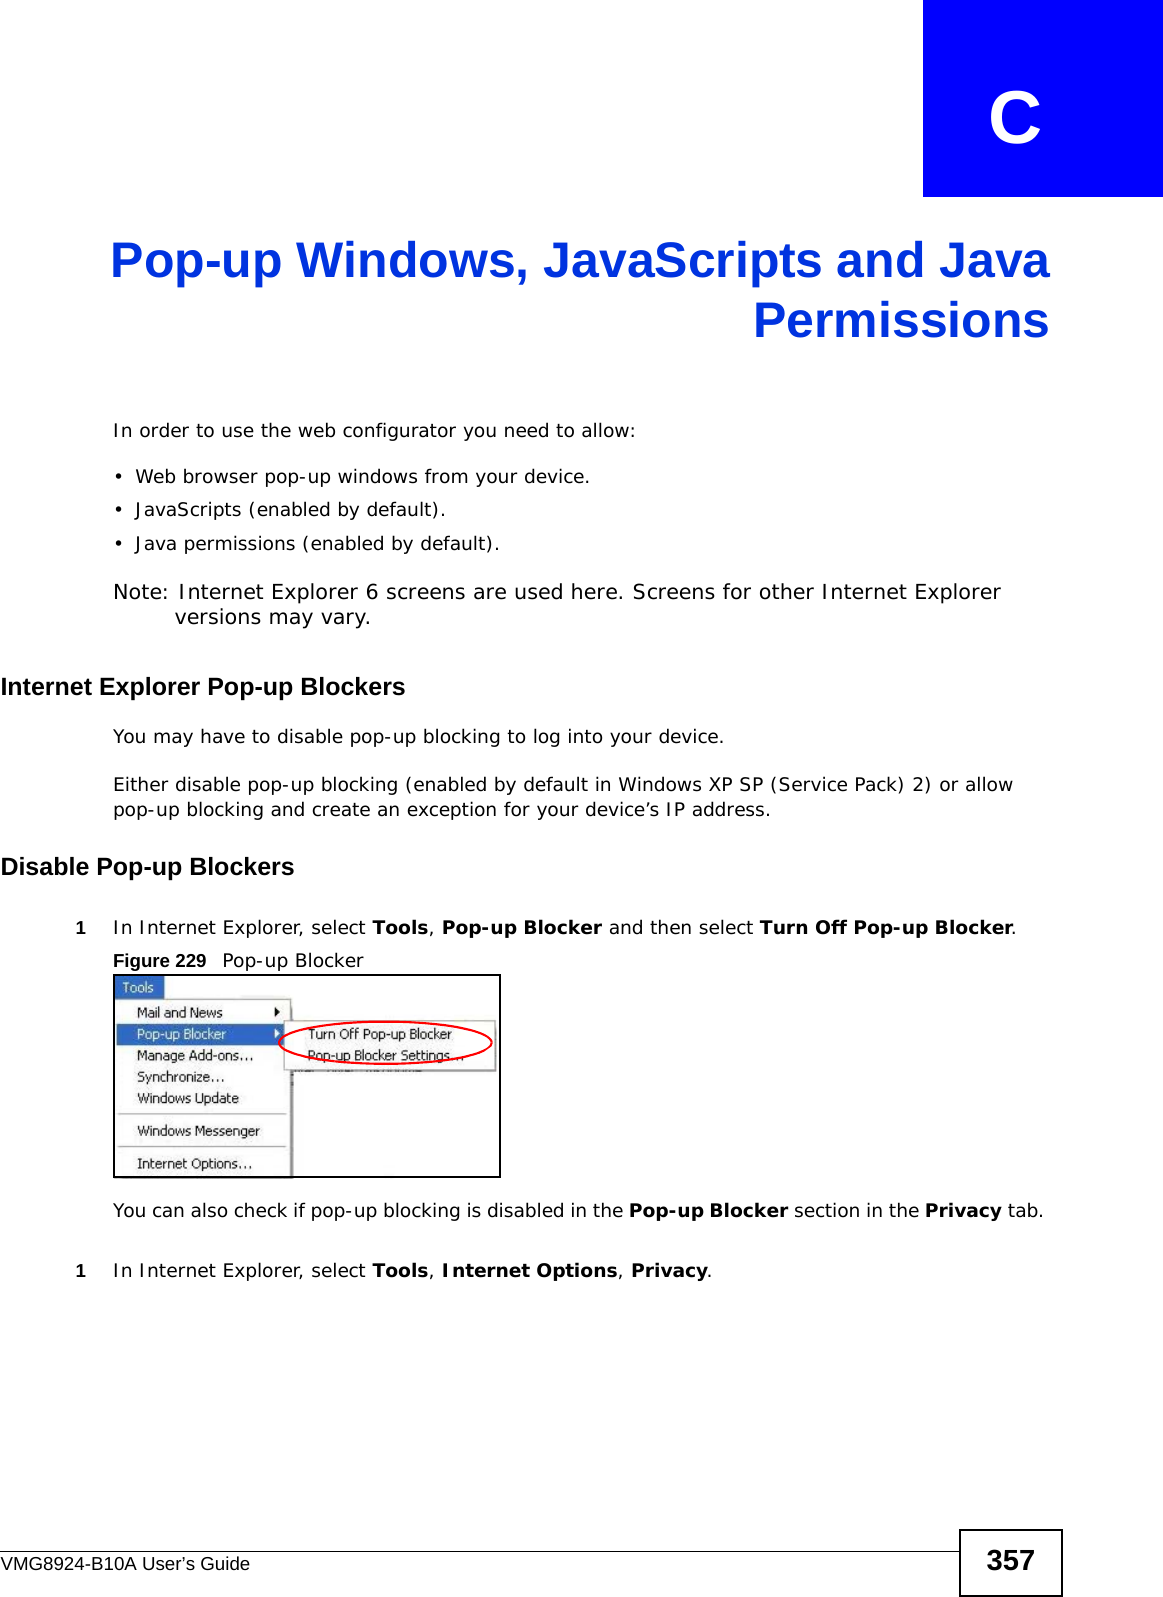 VMG8924-B10A User’s Guide 357APPENDIX   CPop-up Windows, JavaScripts and JavaPermissionsIn order to use the web configurator you need to allow:• Web browser pop-up windows from your device.• JavaScripts (enabled by default).• Java permissions (enabled by default).Note: Internet Explorer 6 screens are used here. Screens for other Internet Explorer versions may vary.Internet Explorer Pop-up BlockersYou may have to disable pop-up blocking to log into your device. Either disable pop-up blocking (enabled by default in Windows XP SP (Service Pack) 2) or allow pop-up blocking and create an exception for your device’s IP address.Disable Pop-up Blockers1In Internet Explorer, select Tools, Pop-up Blocker and then select Turn Off Pop-up Blocker. Figure 229   Pop-up BlockerYou can also check if pop-up blocking is disabled in the Pop-up Blocker section in the Privacy tab. 1In Internet Explorer, select Tools, Internet Options, Privacy.